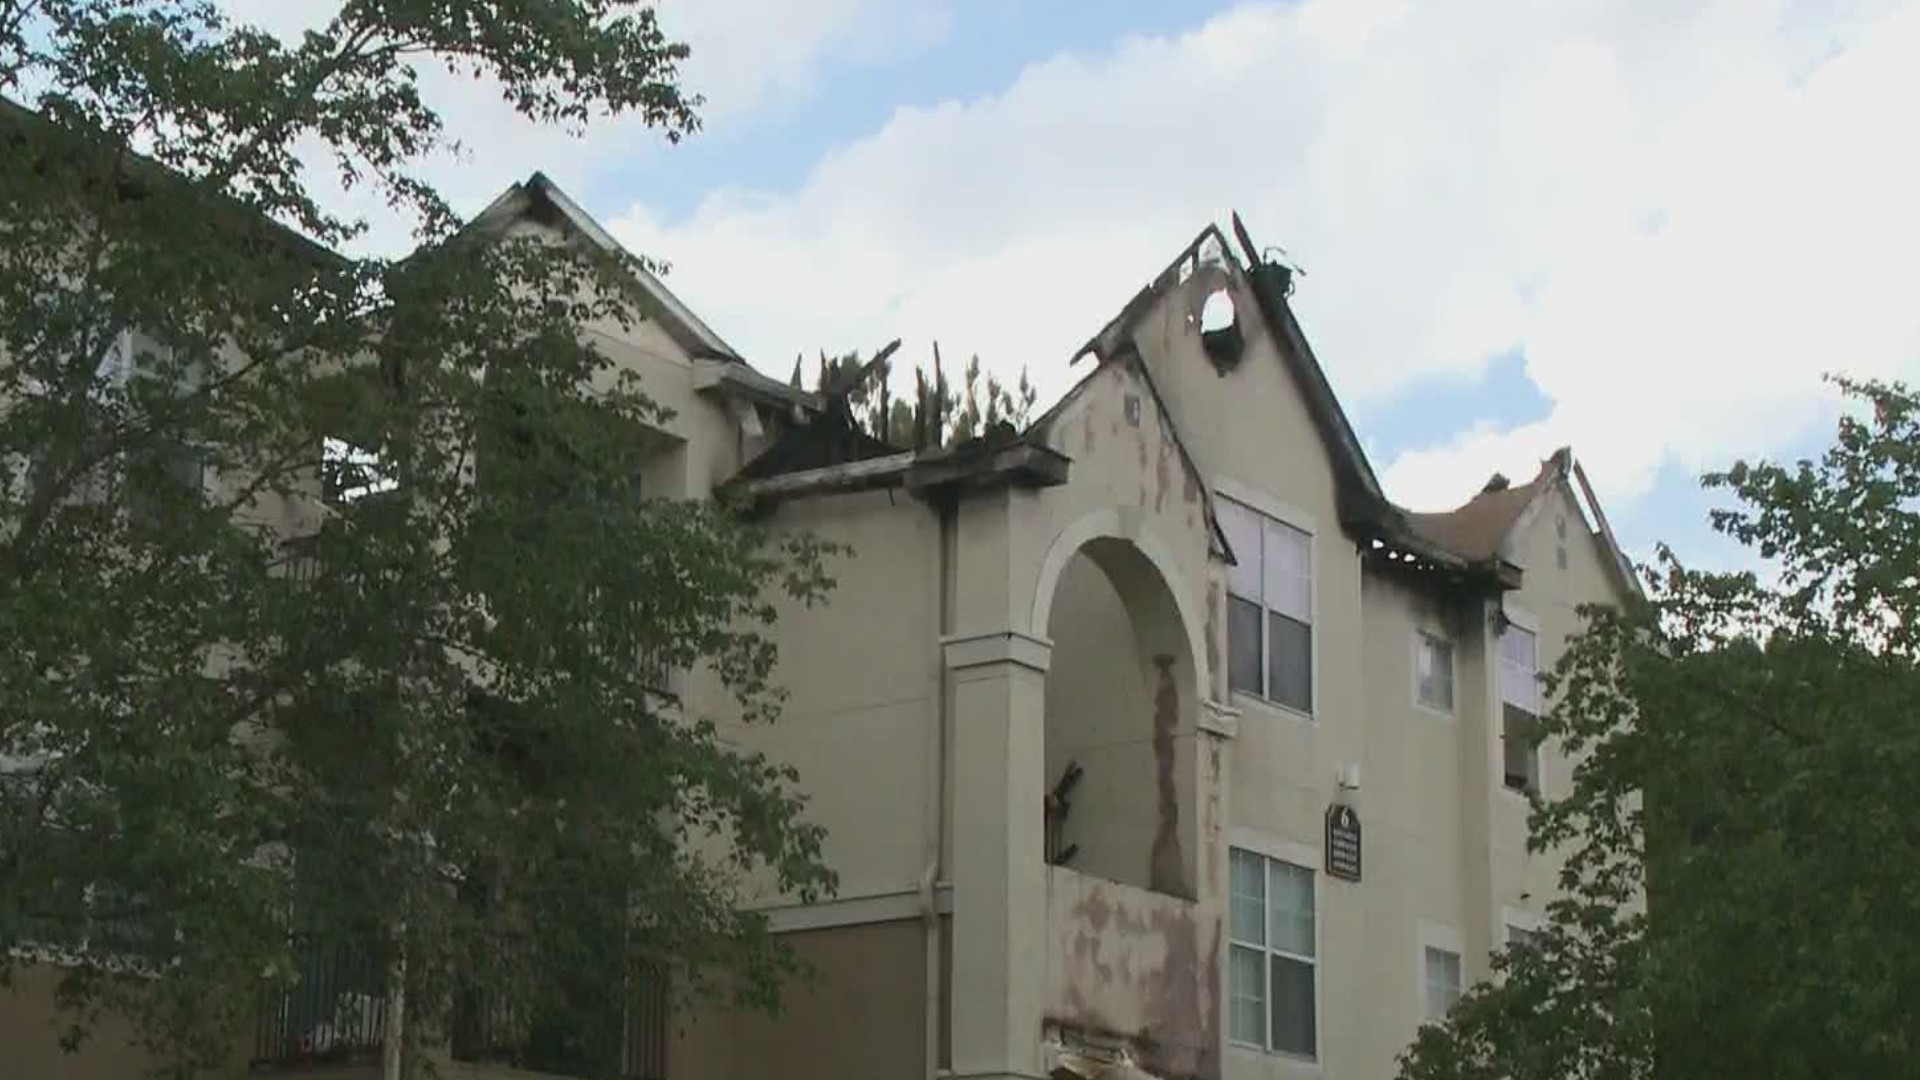 The Red Cross met with family members after the apartment fire near Duluth swept through a building.